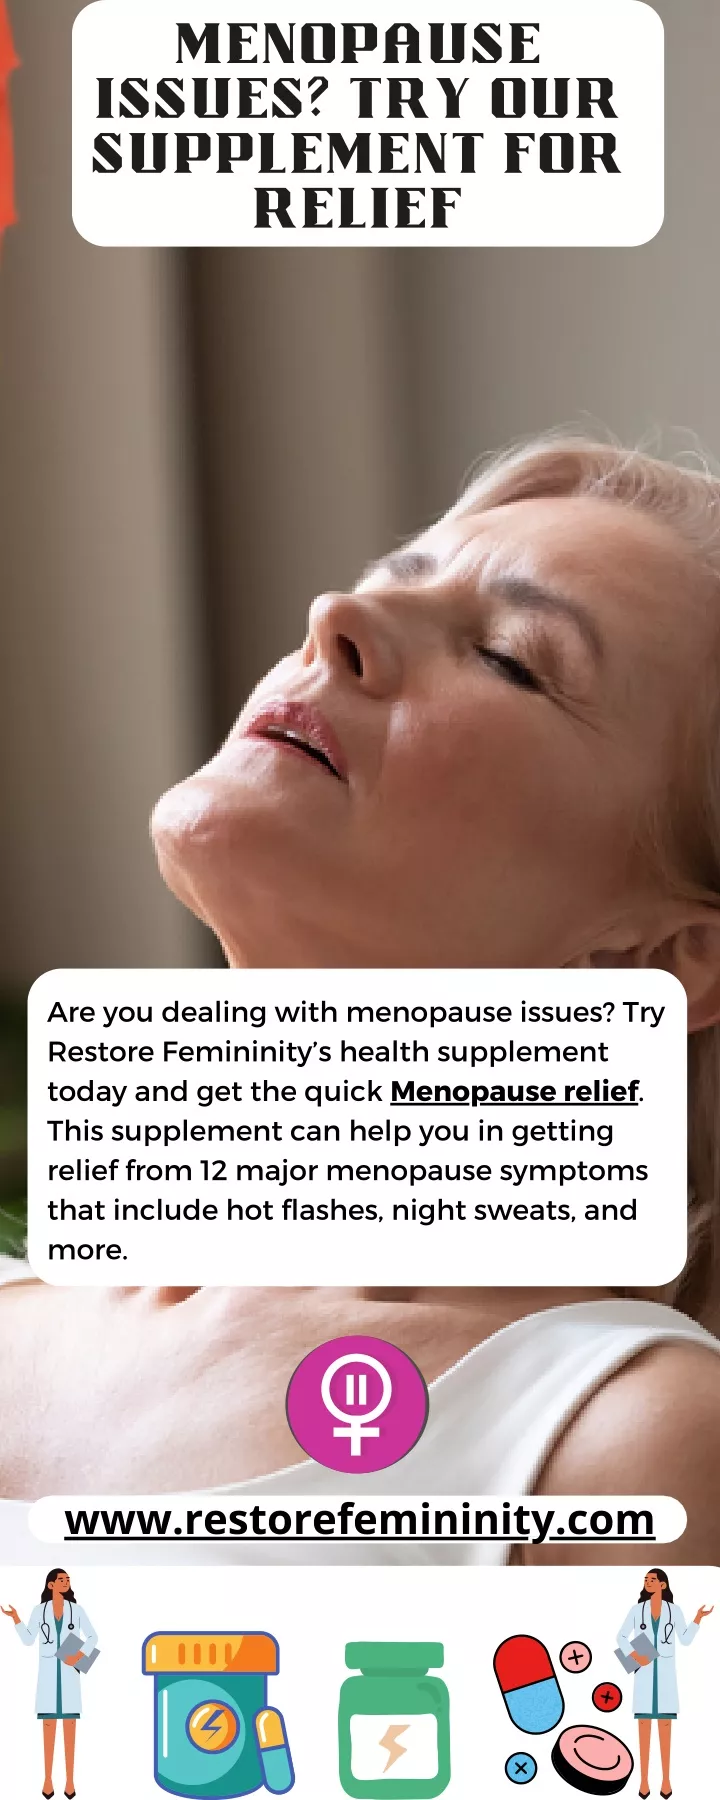 menopause issues try our supplement for relief